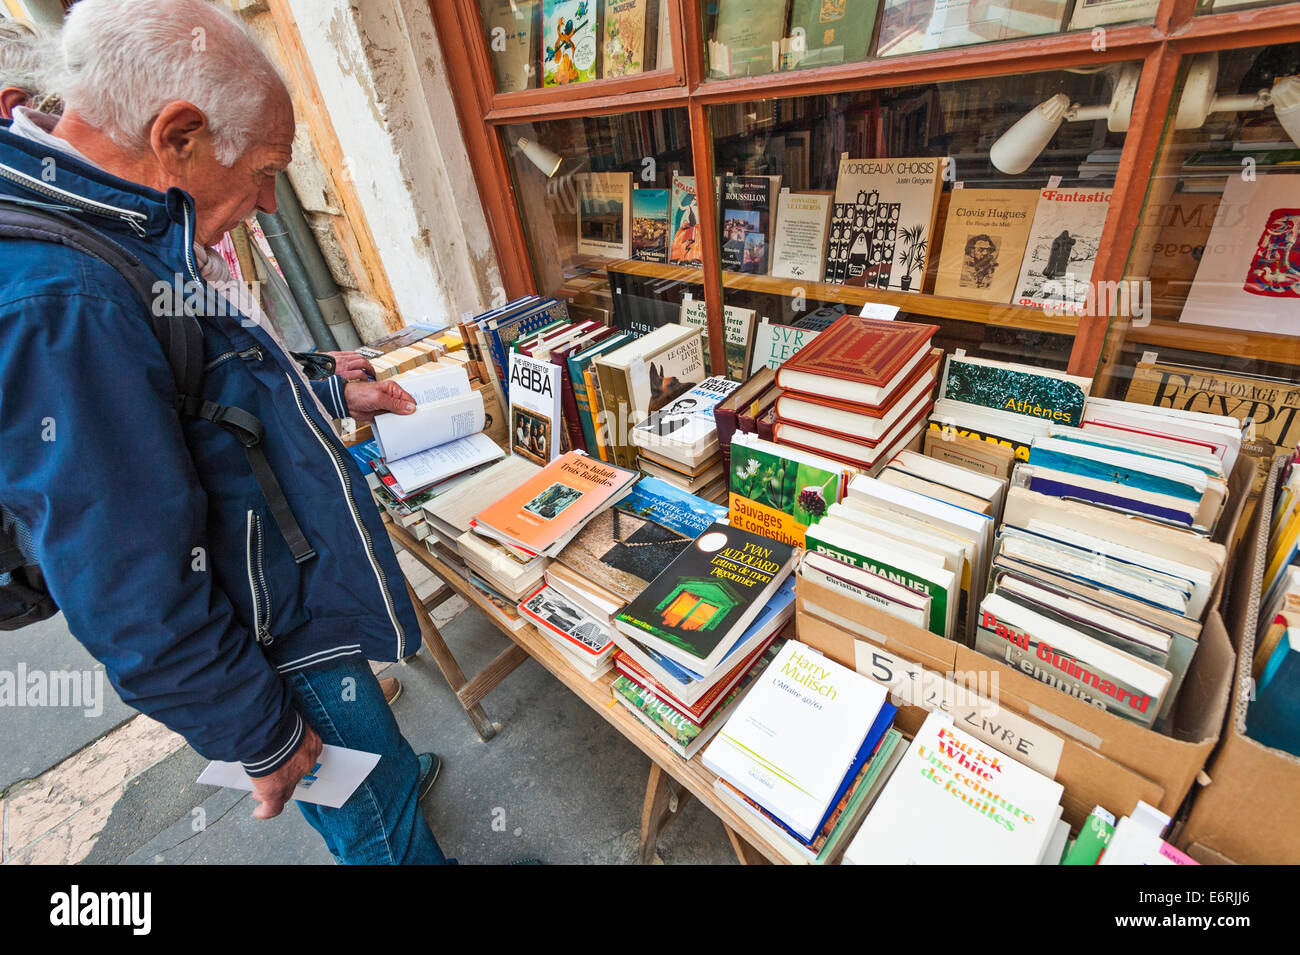 A French man browsing through the books on display in the street, outside a French bookshop Stock Photo